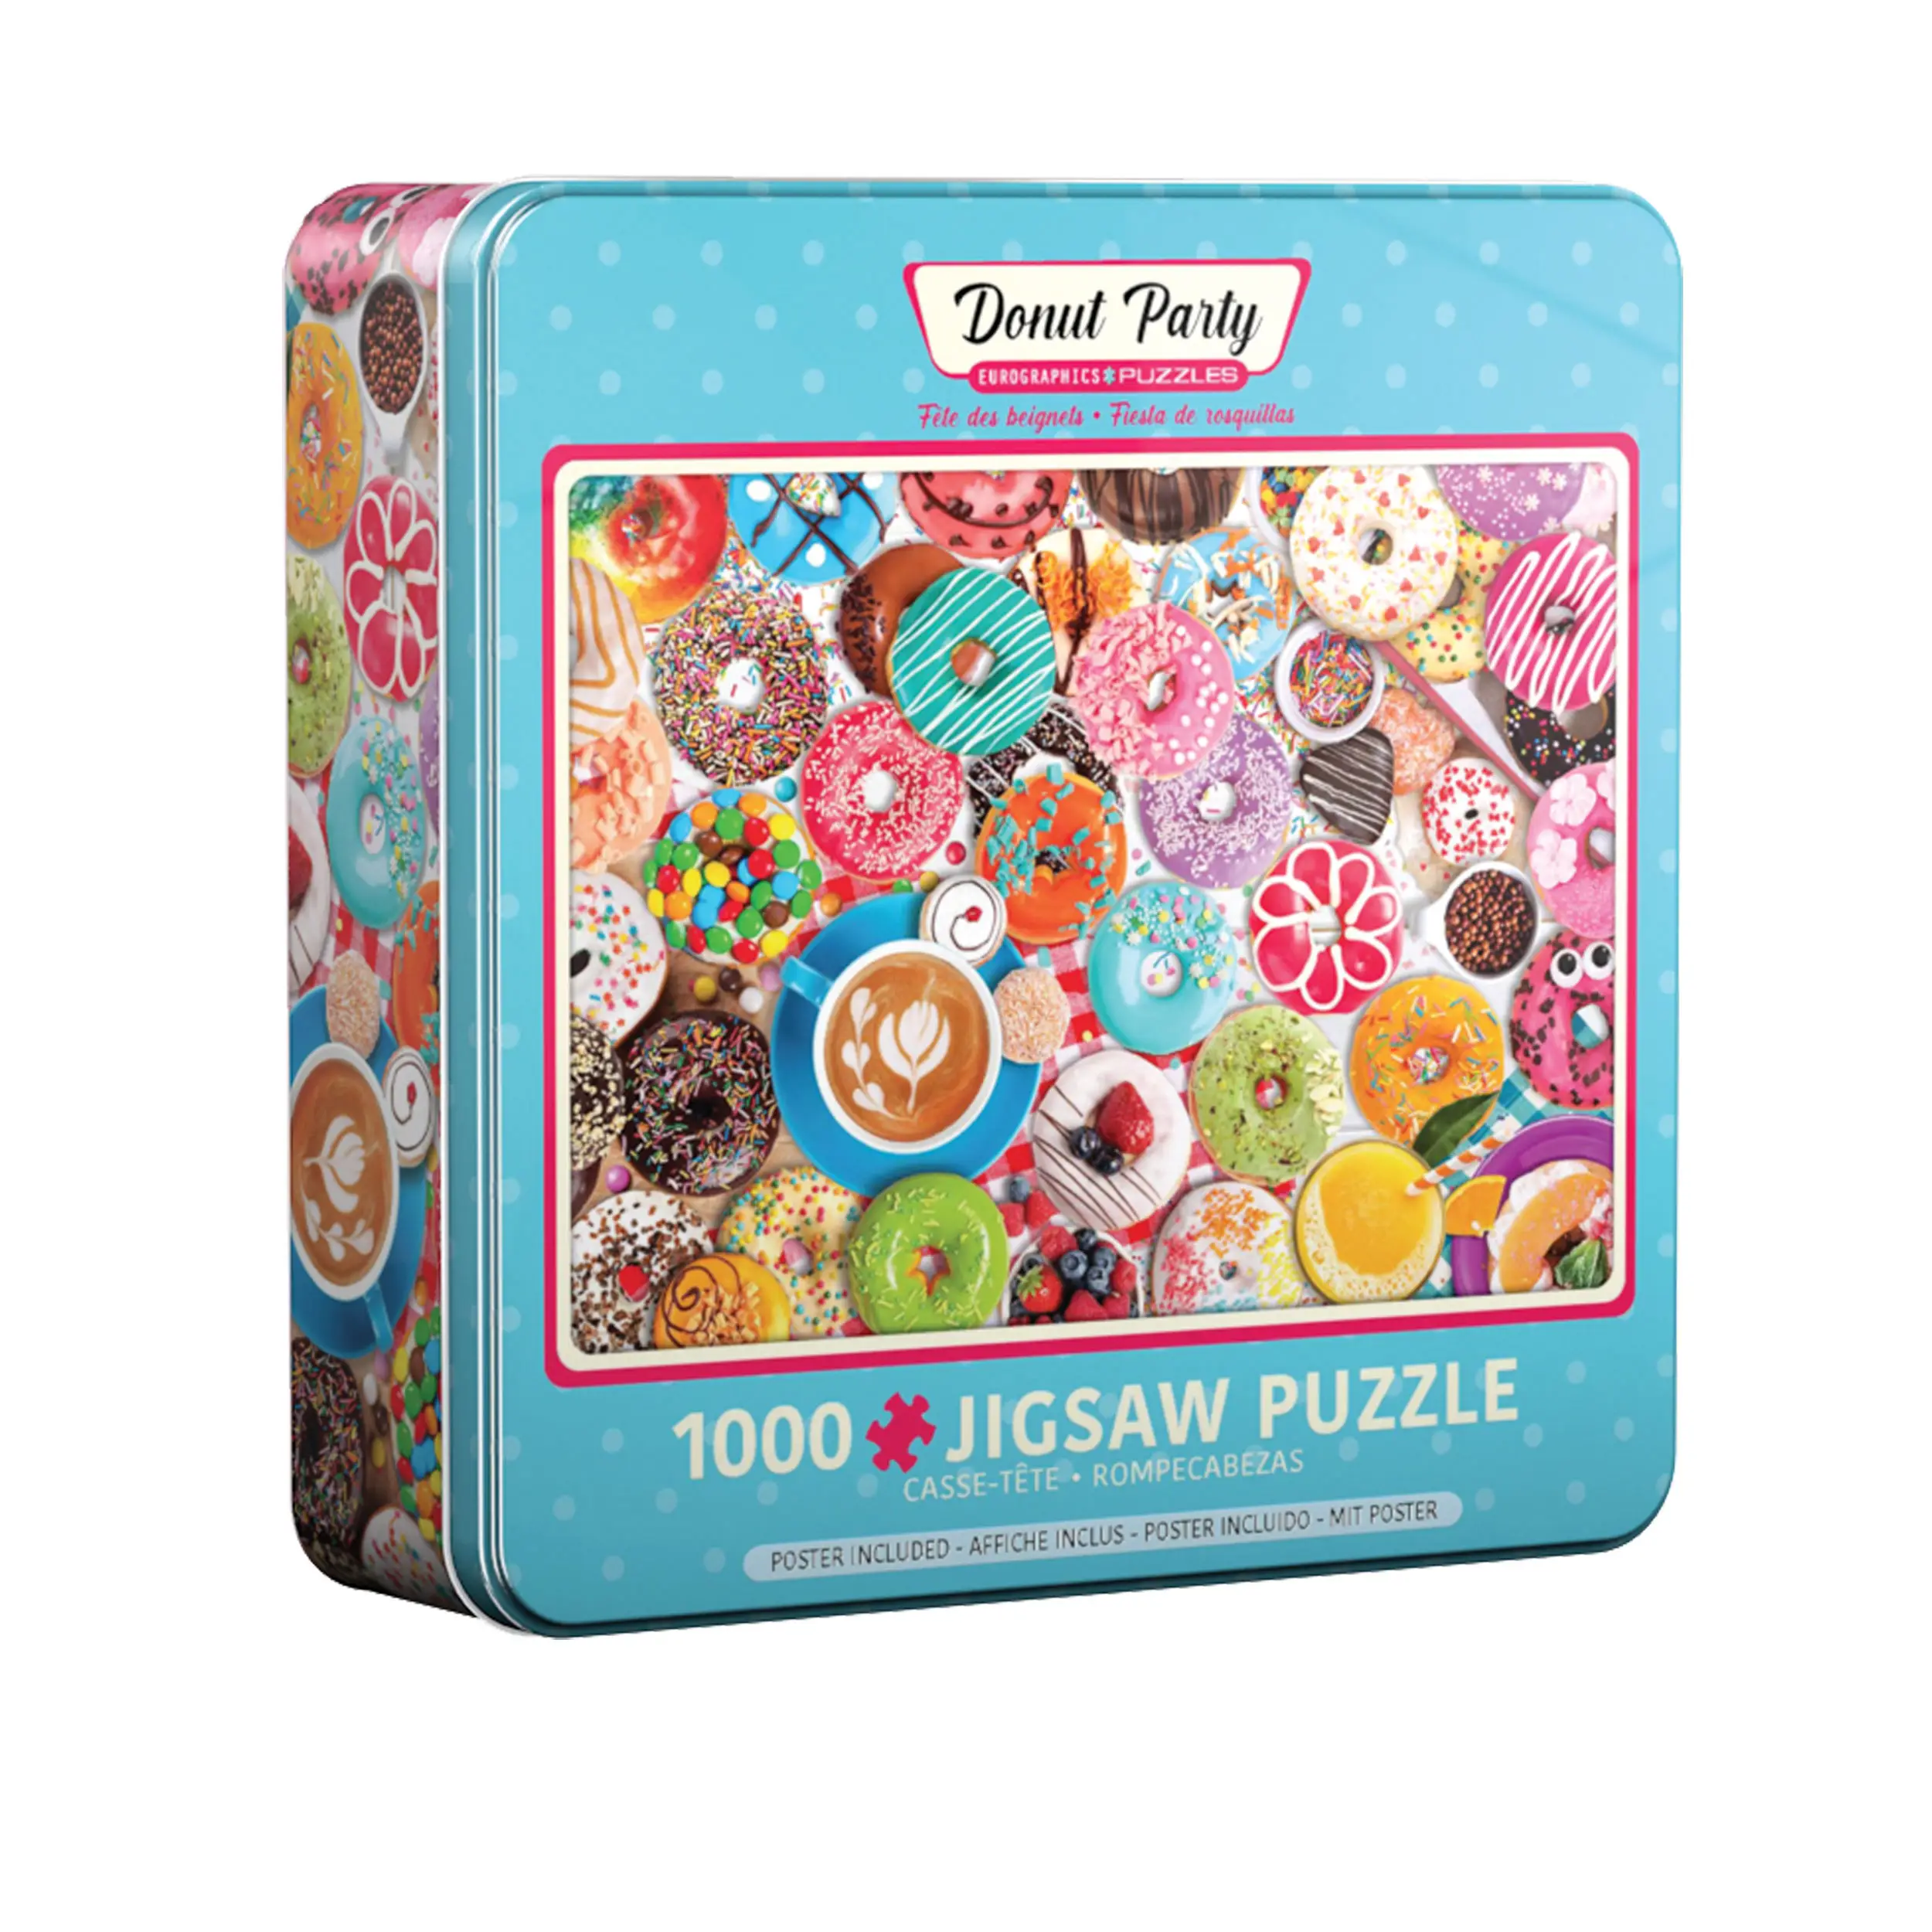 Puzzle Donut Party in Puzzledose